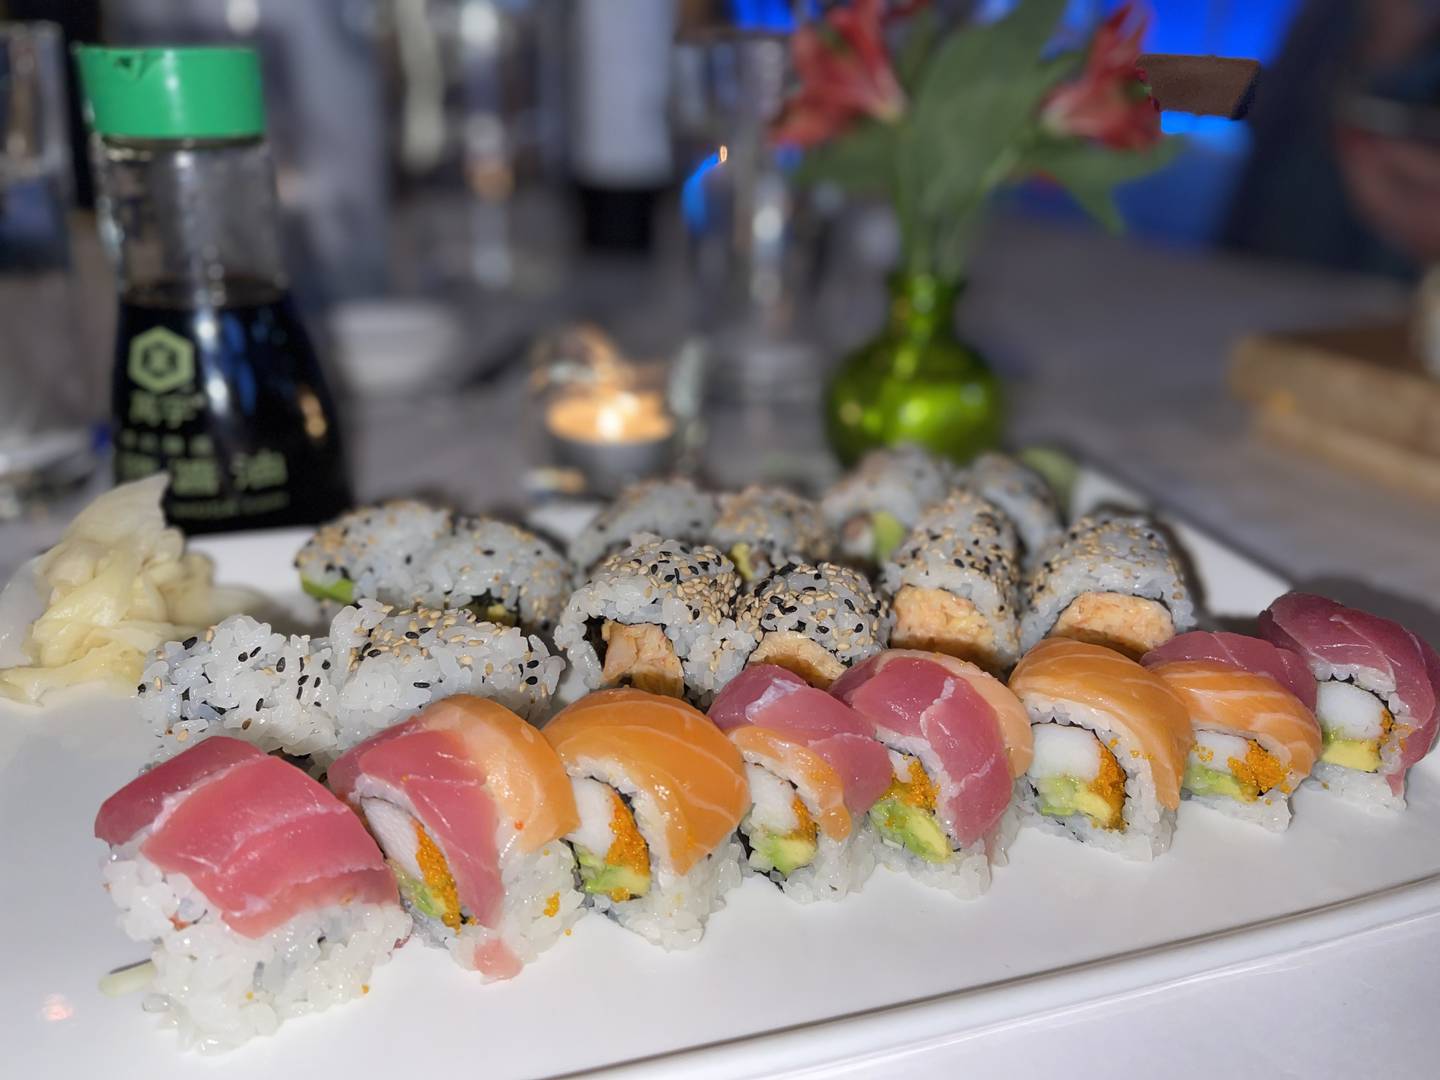 A platter of sushi and maki, Sapporo Roll, made with a spicy blend of crab and shrimp; Cancun Roll, cooked shrimp, pico de gallo and avocado; Rainbow Roll, crab, avocado, cucumber, masago, yellowtail and raw salmon and tuna.